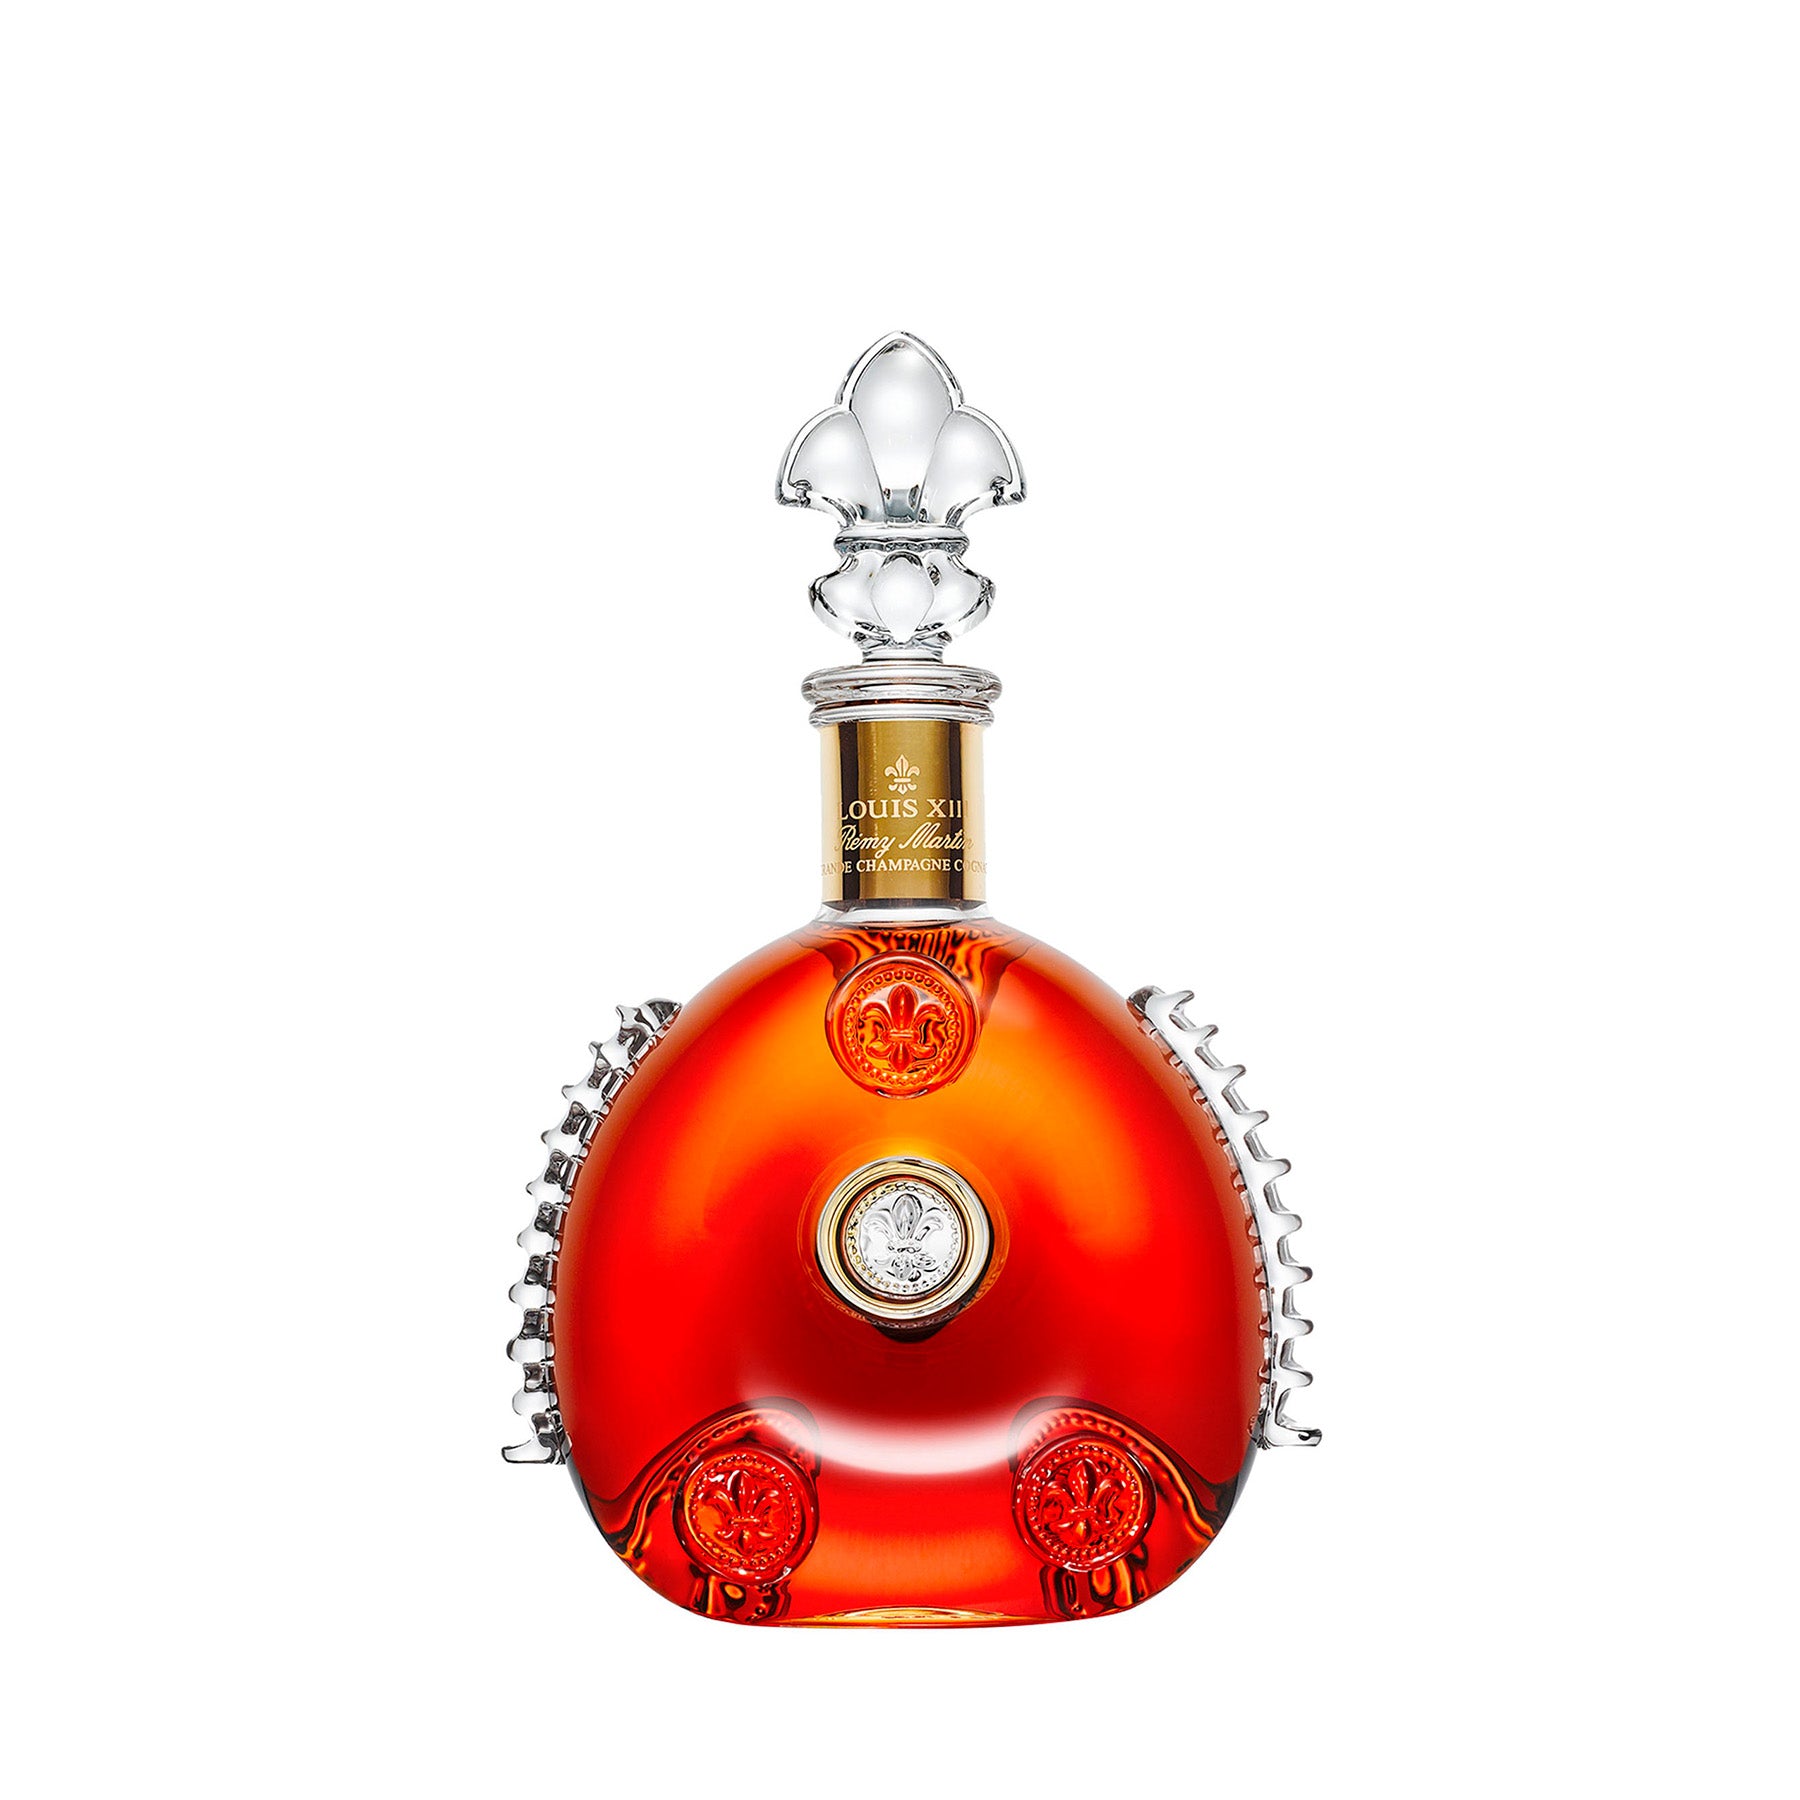 LOUIS XIII REMY MARTIN 700 MLT 40%